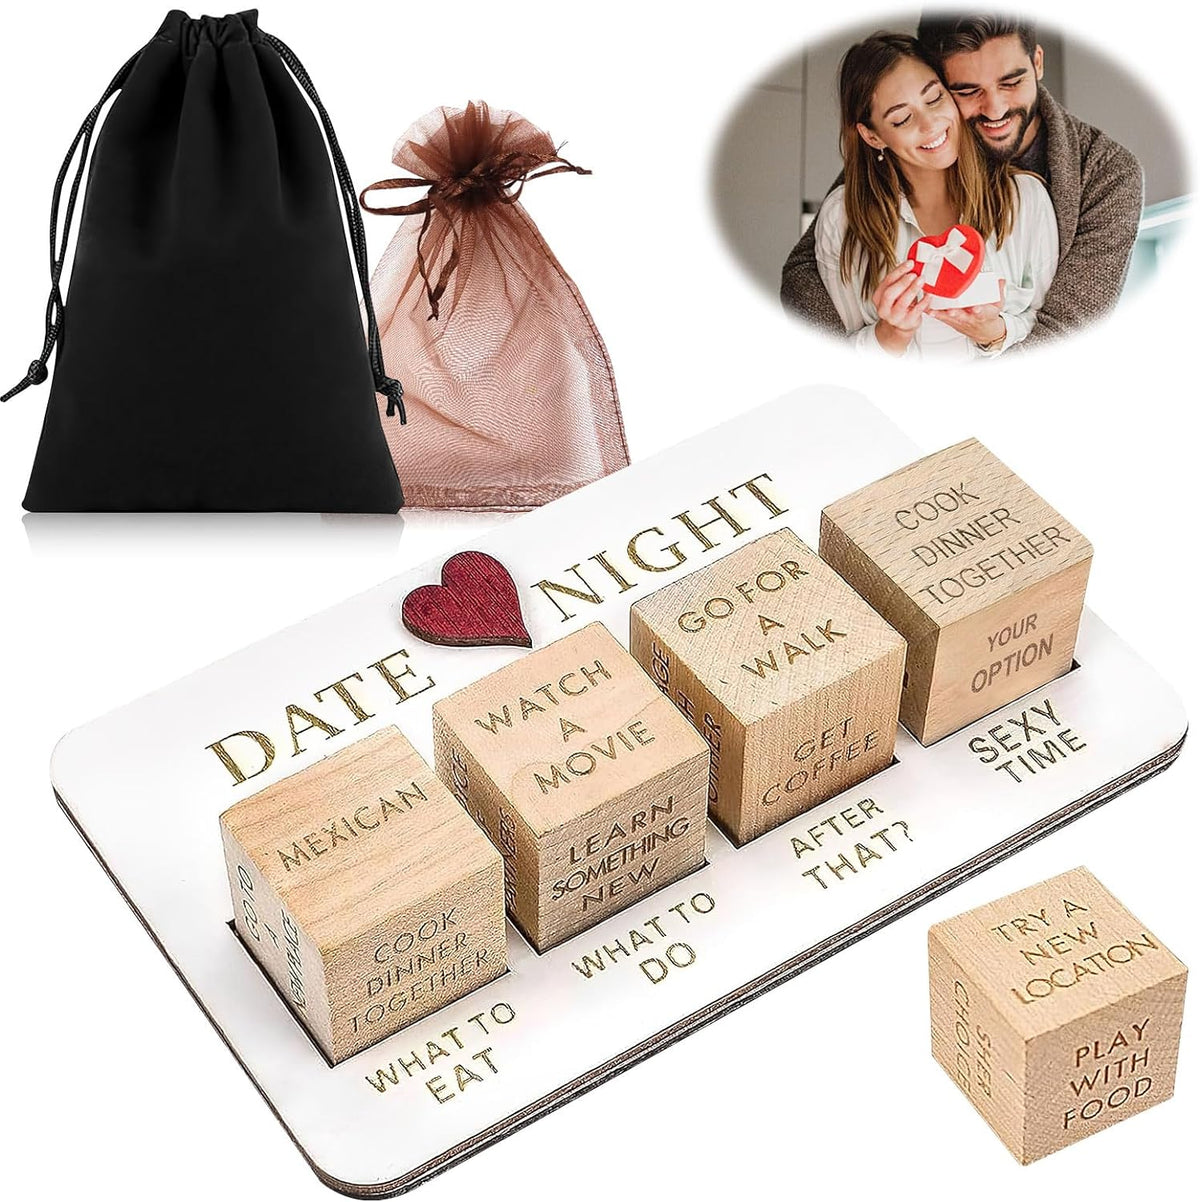 Date Night Dice Couples Gift Ideas, Decision Dice, Valentine's Day Gifts Cykapu